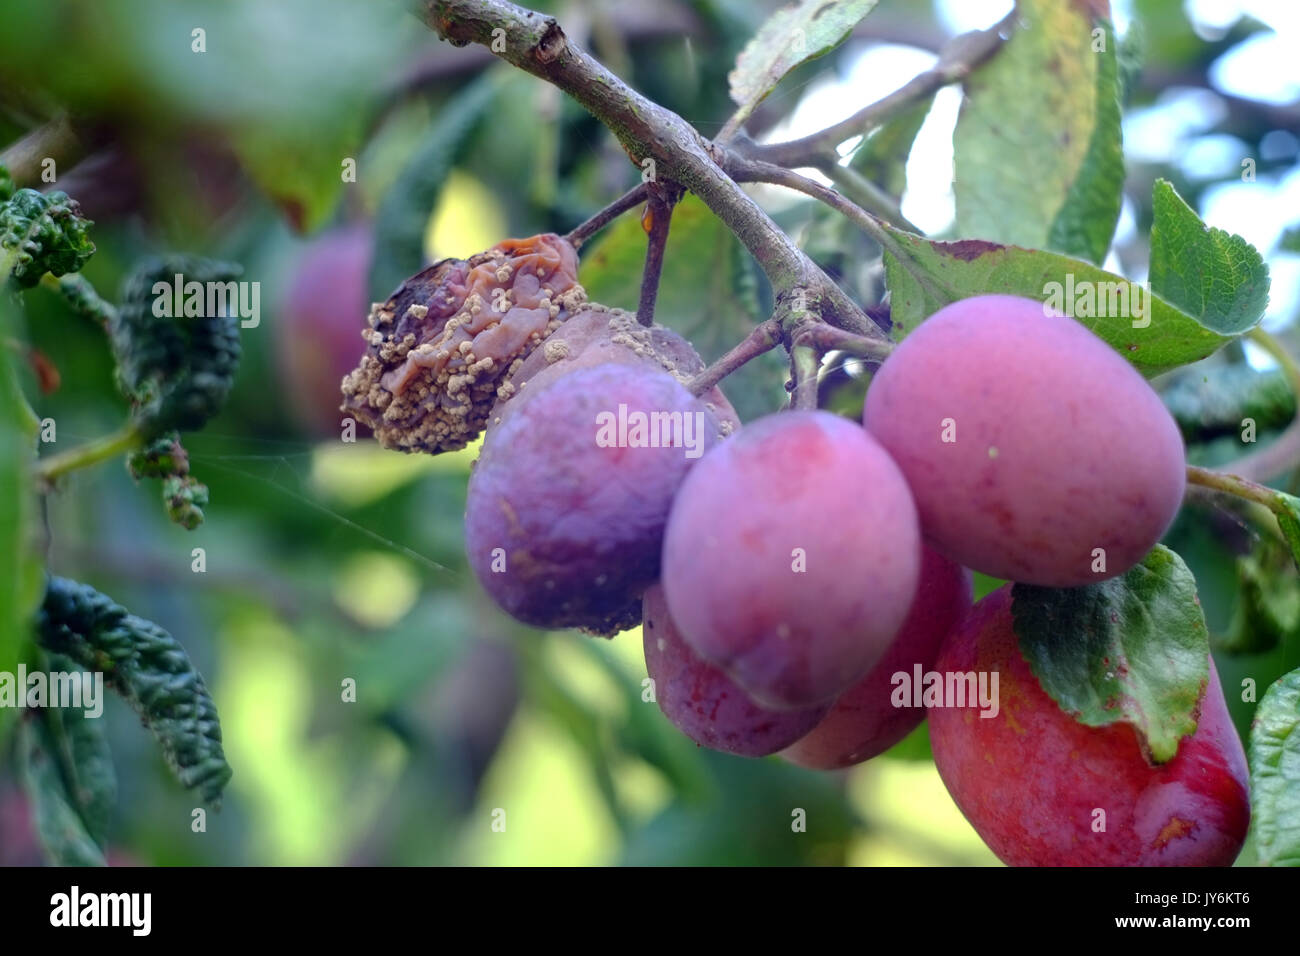 Victoria plums showing signs of disease and fruit rot. Stock Photo